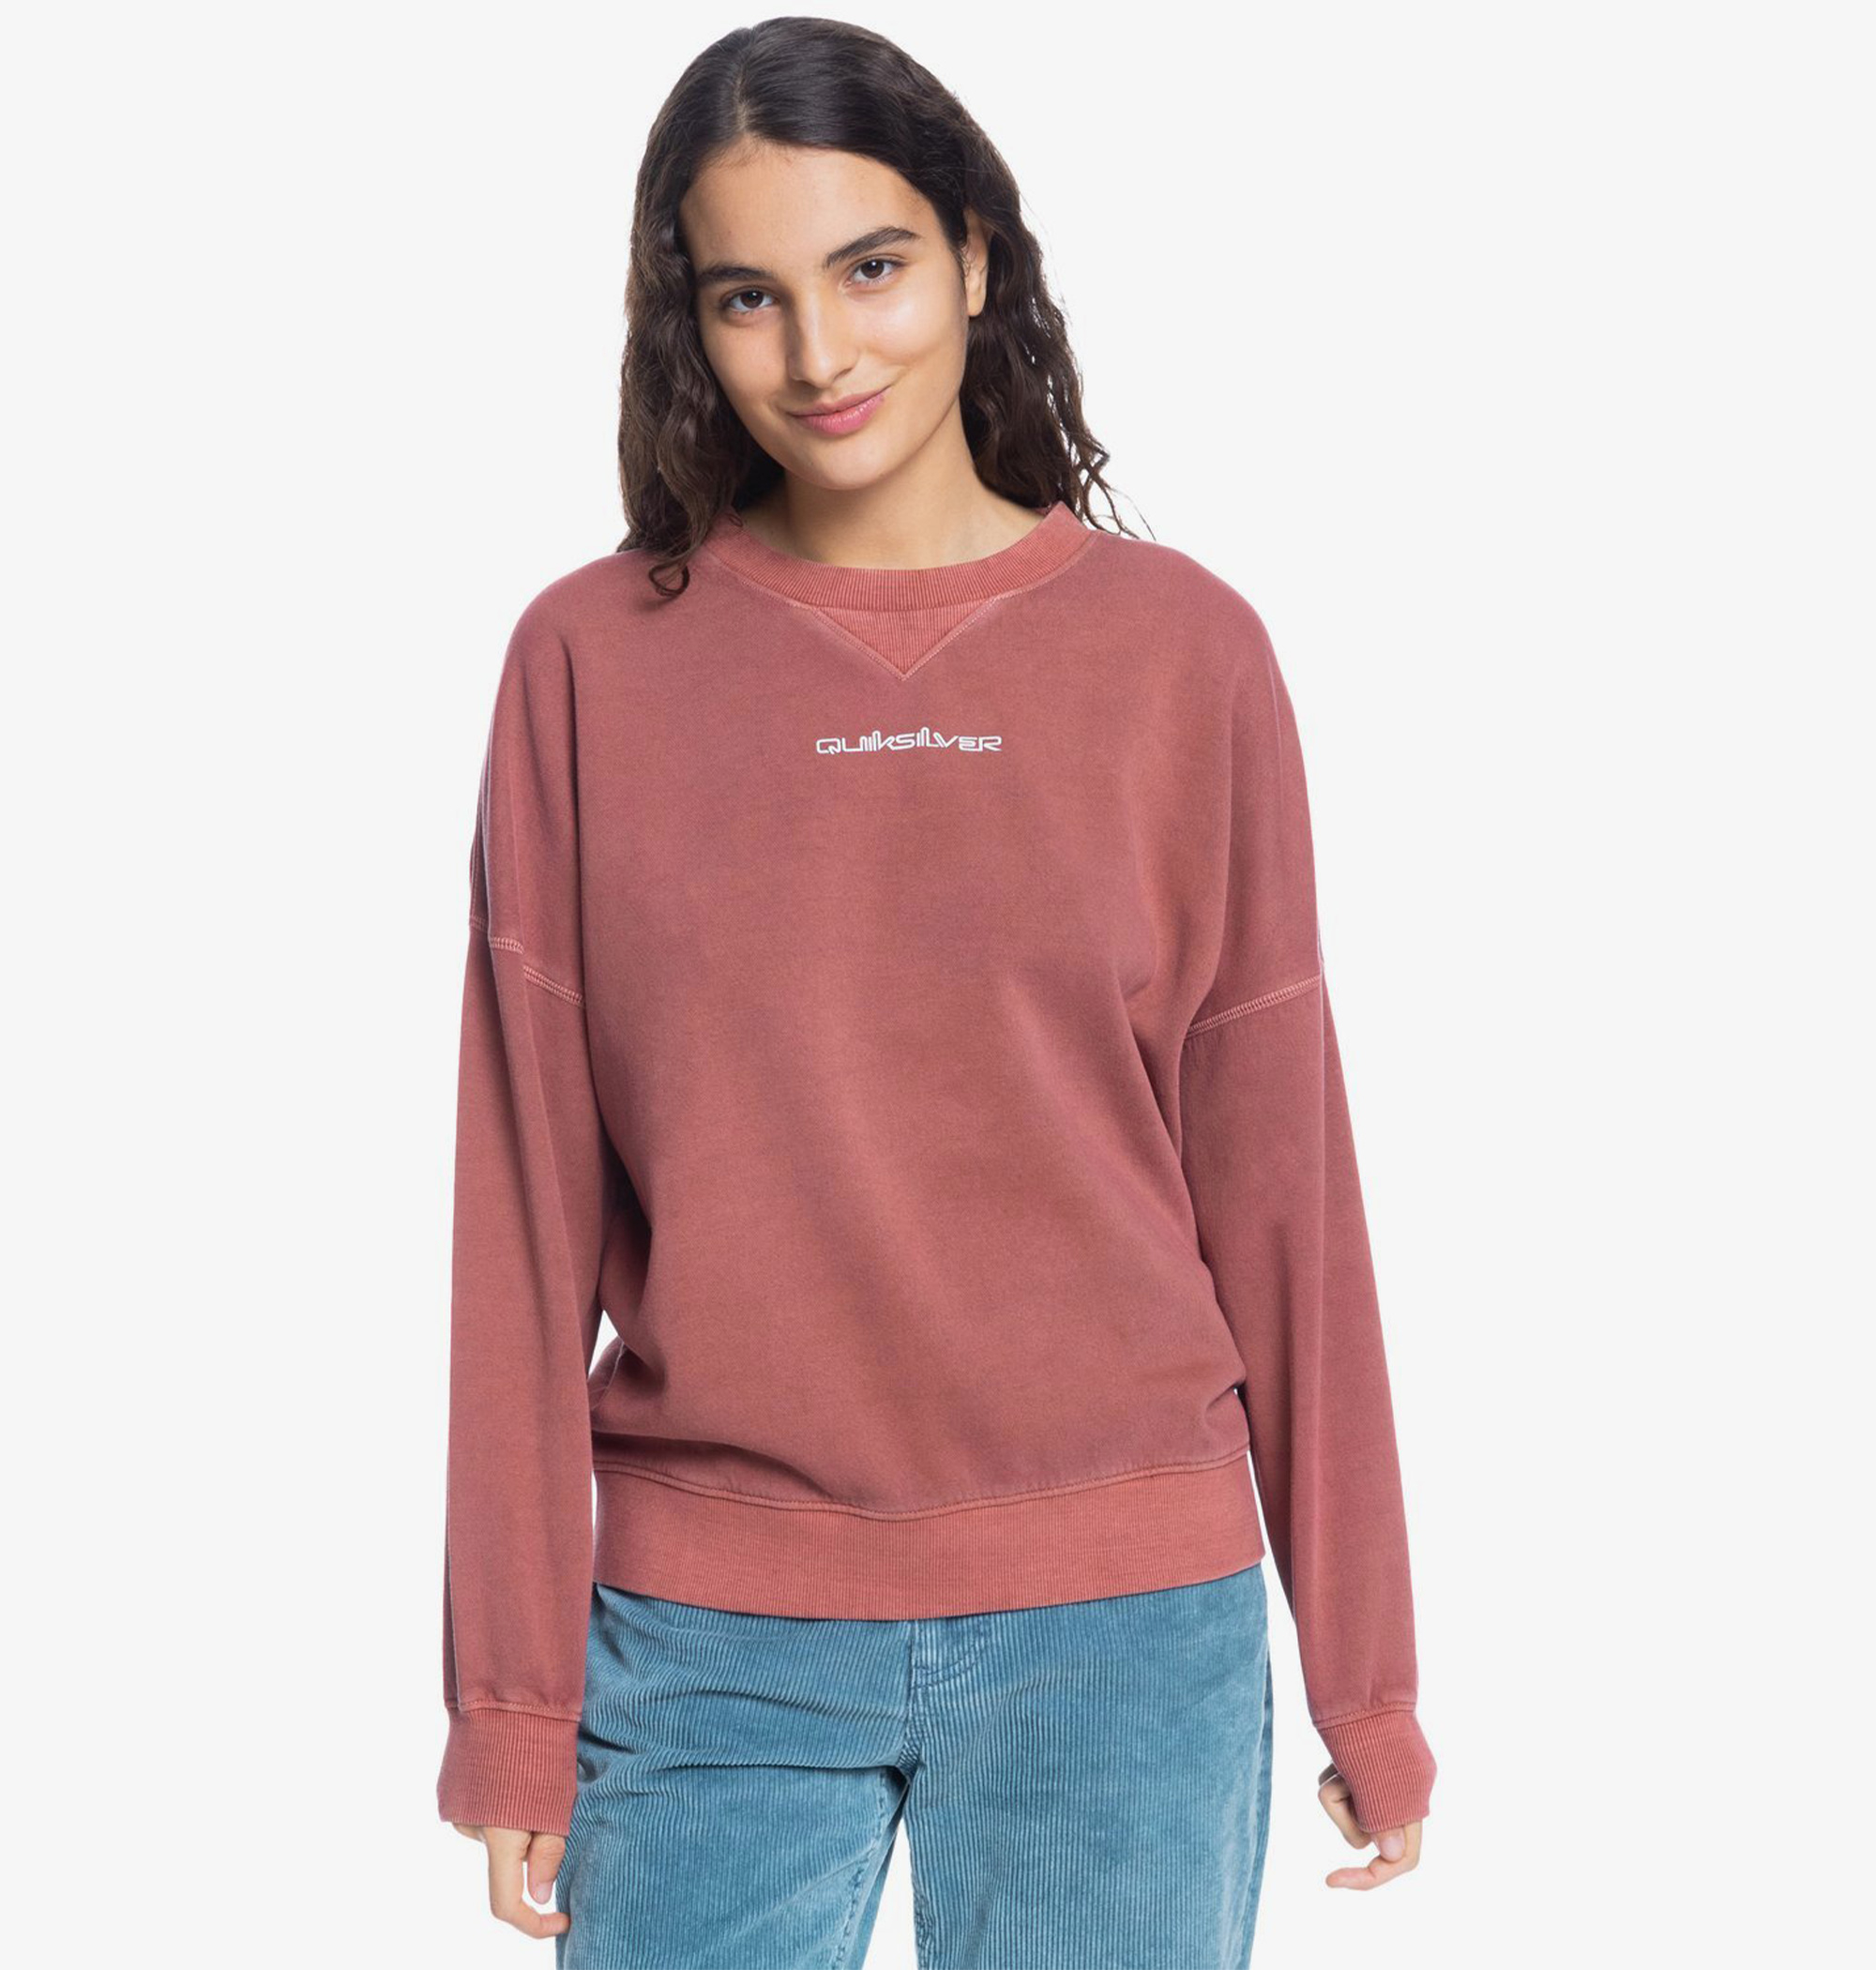 35%OFF！＜Quiksilver＞ STM OVERSIZED CREW 滑らかで優しい肌触りの素材が魅力的なスウェット